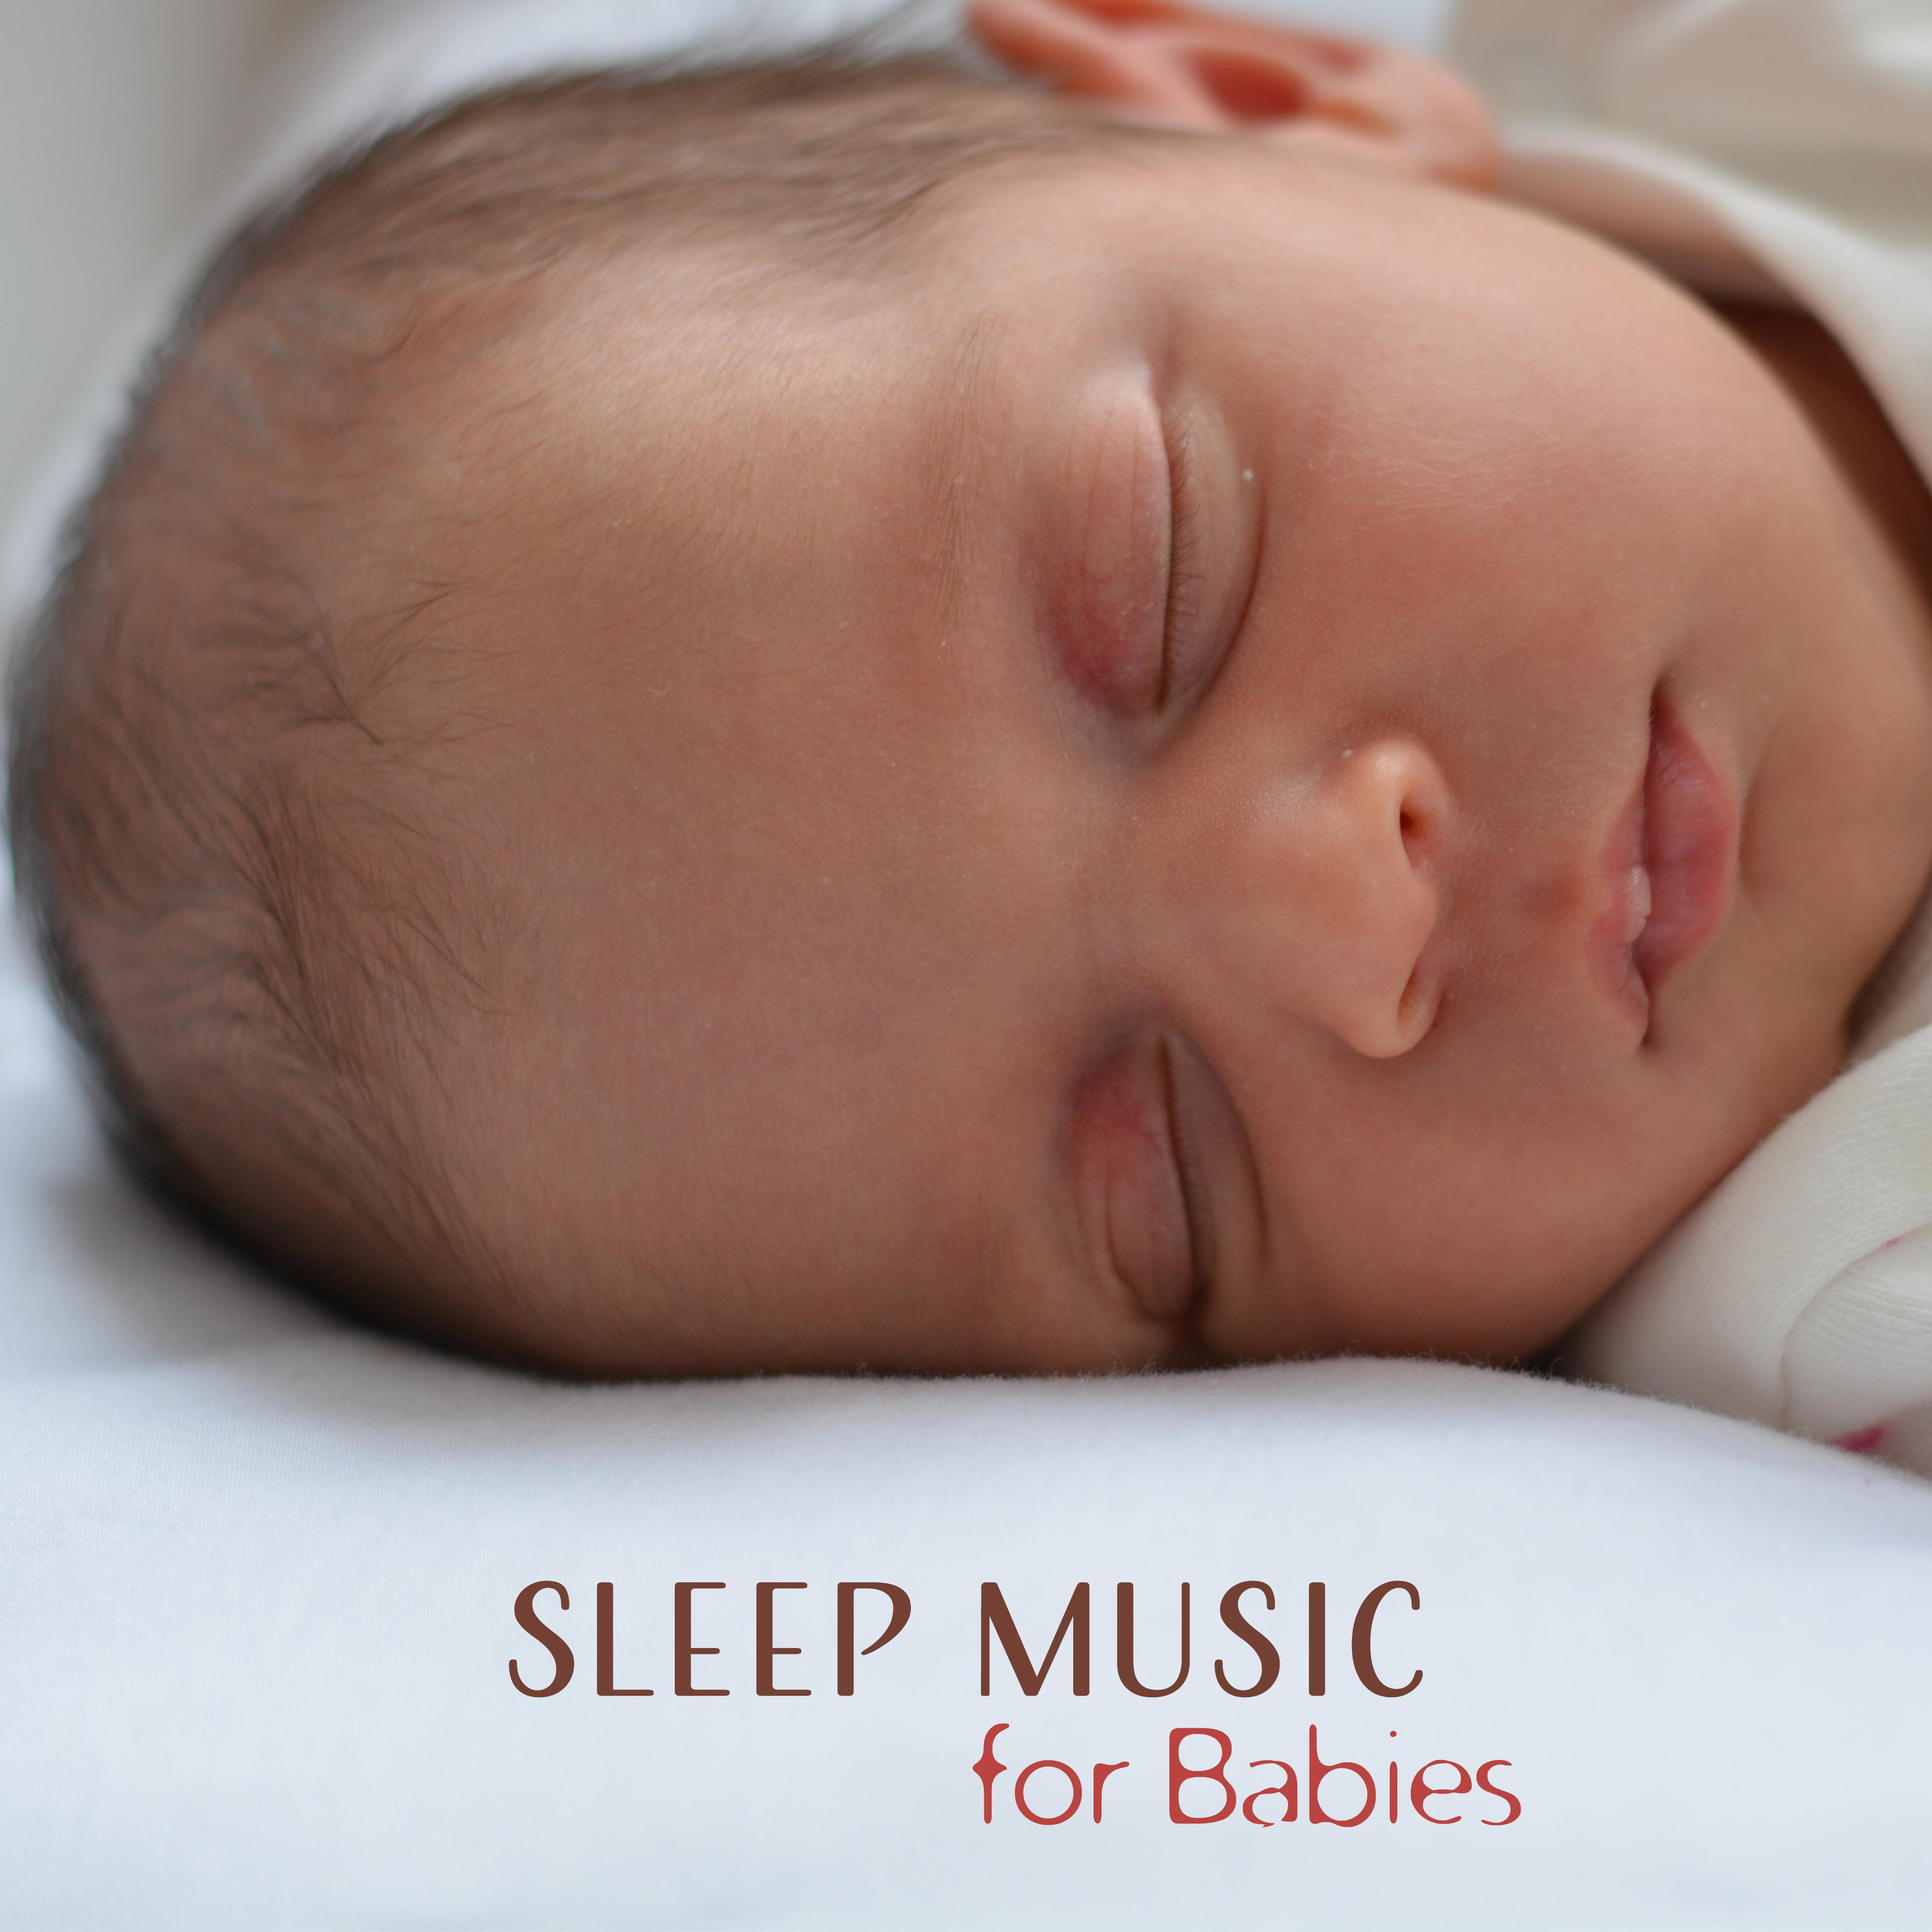 Sleep Music for Babies  Relaxing Music for Sweet Toddlers, Babies Music, Music for Children